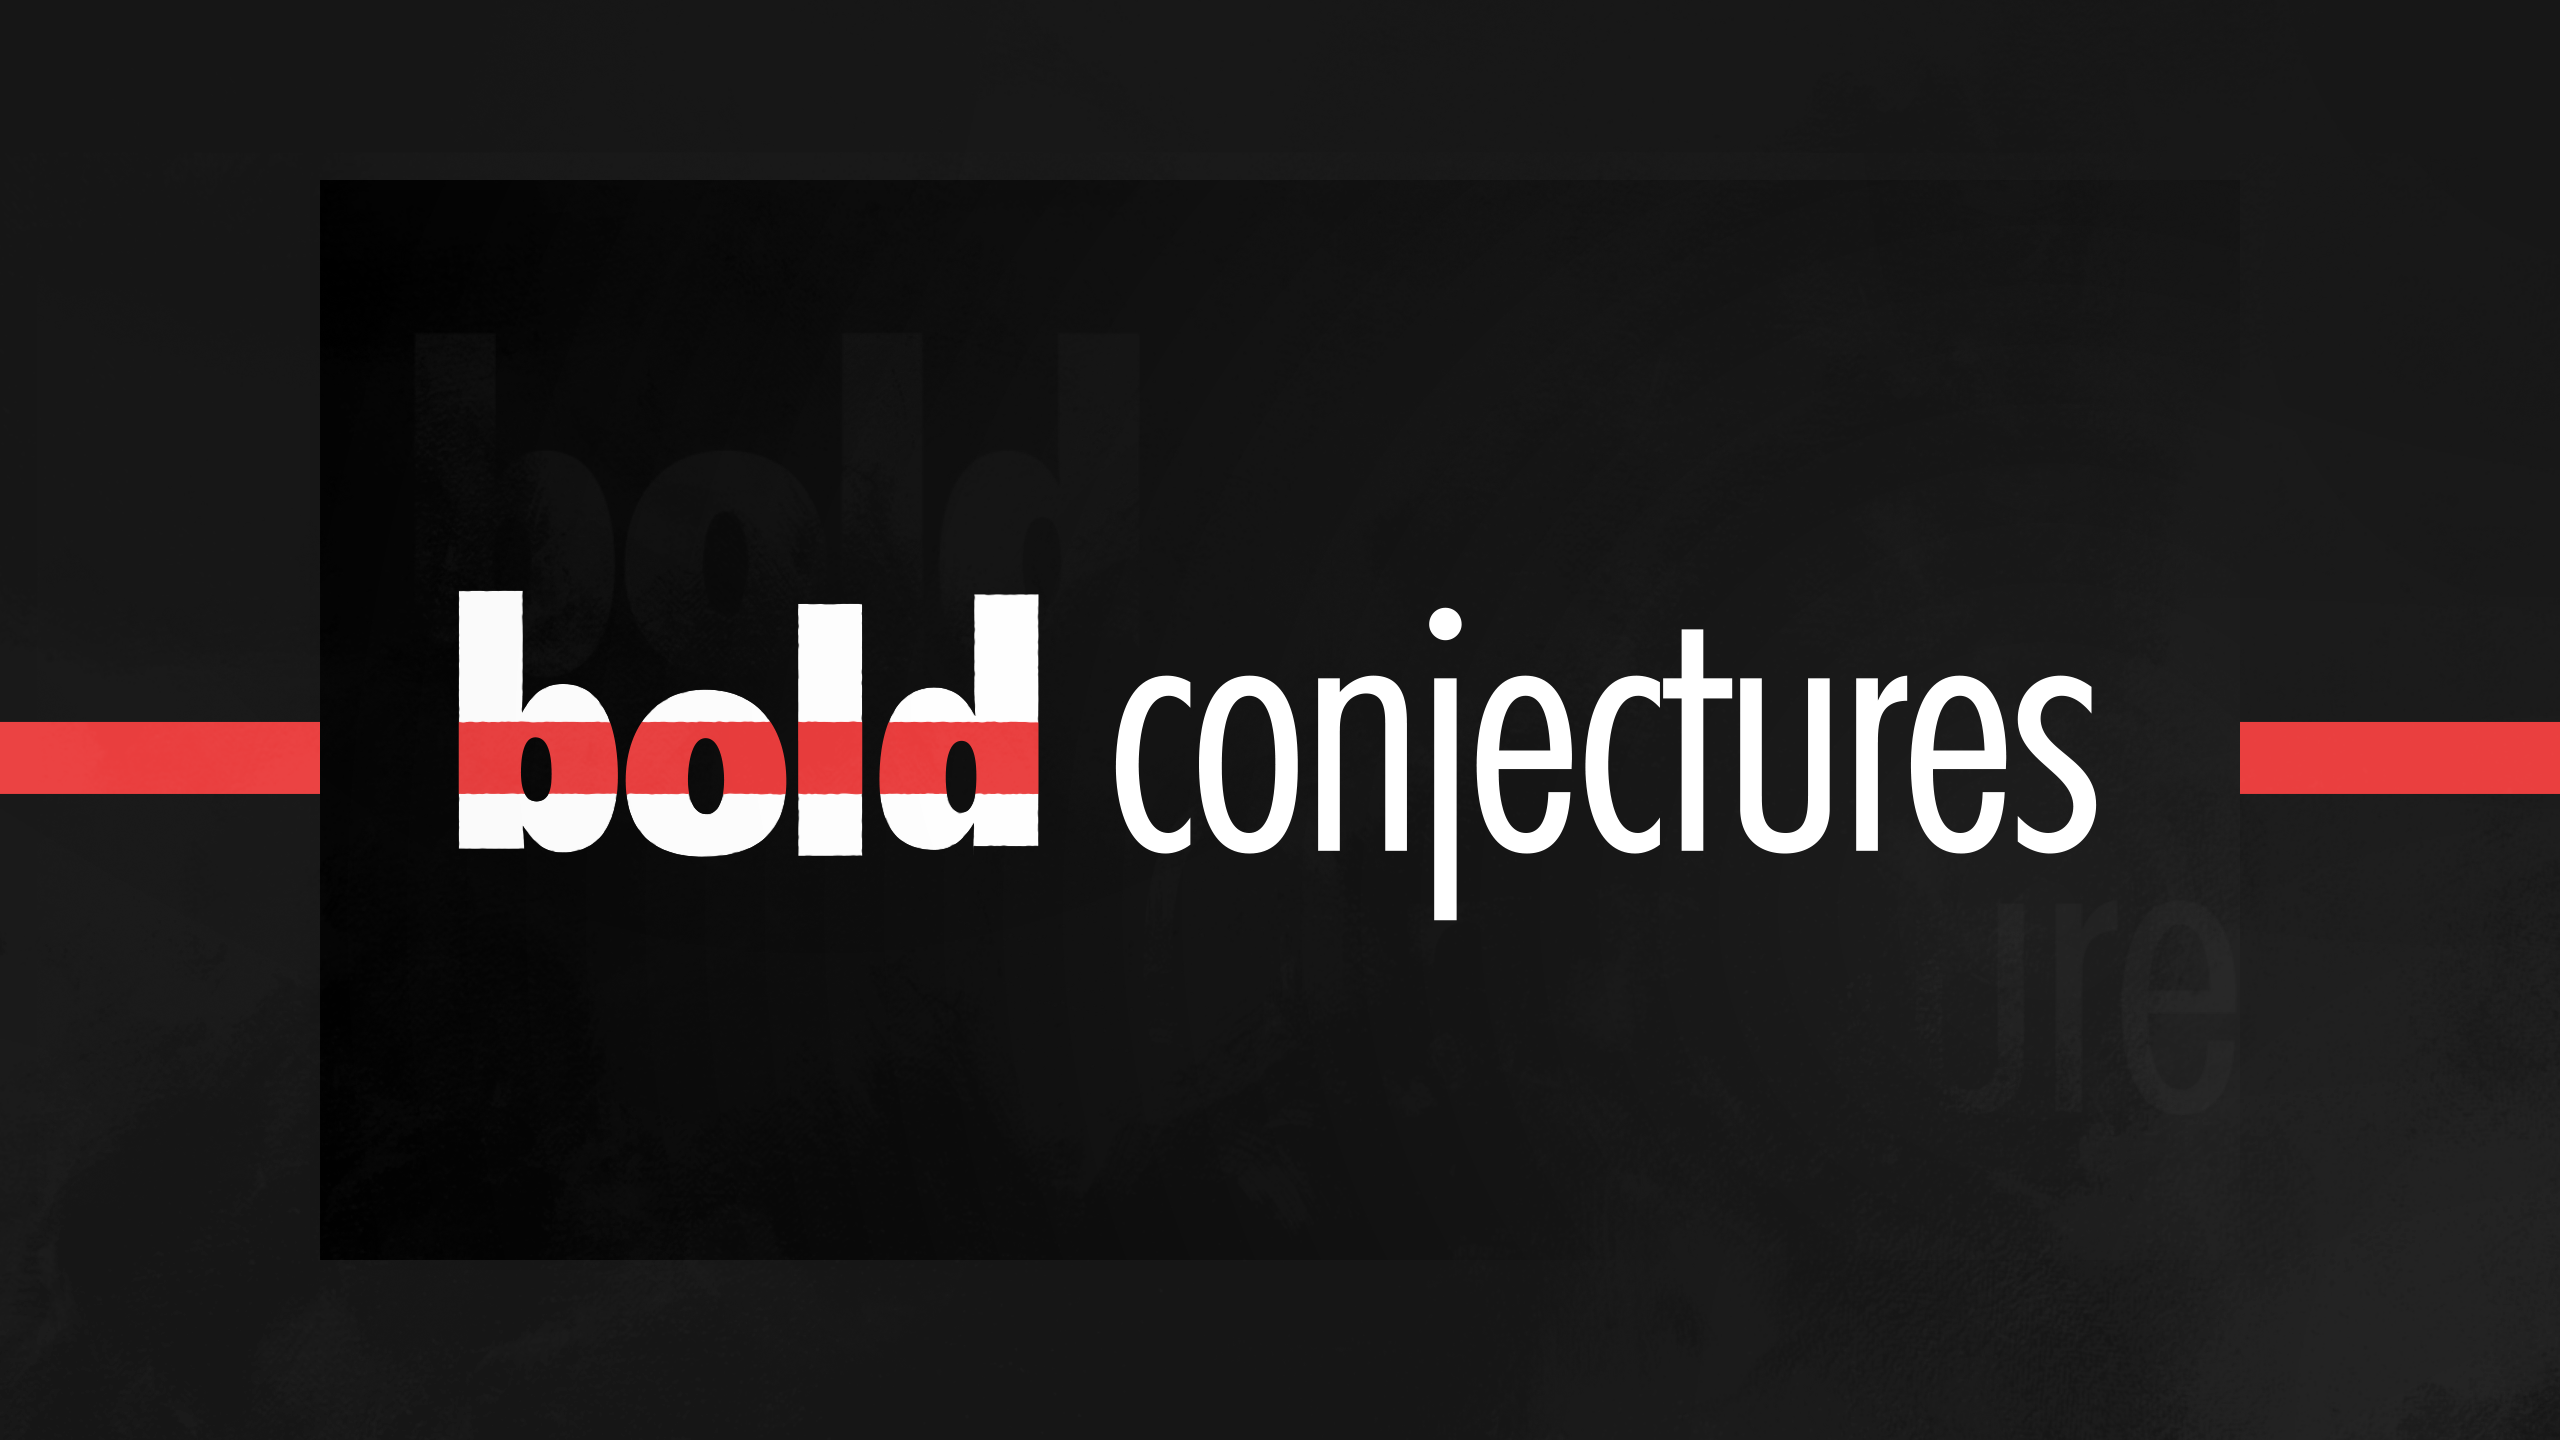 Bold Conjectures Podcast - Inverted Passion